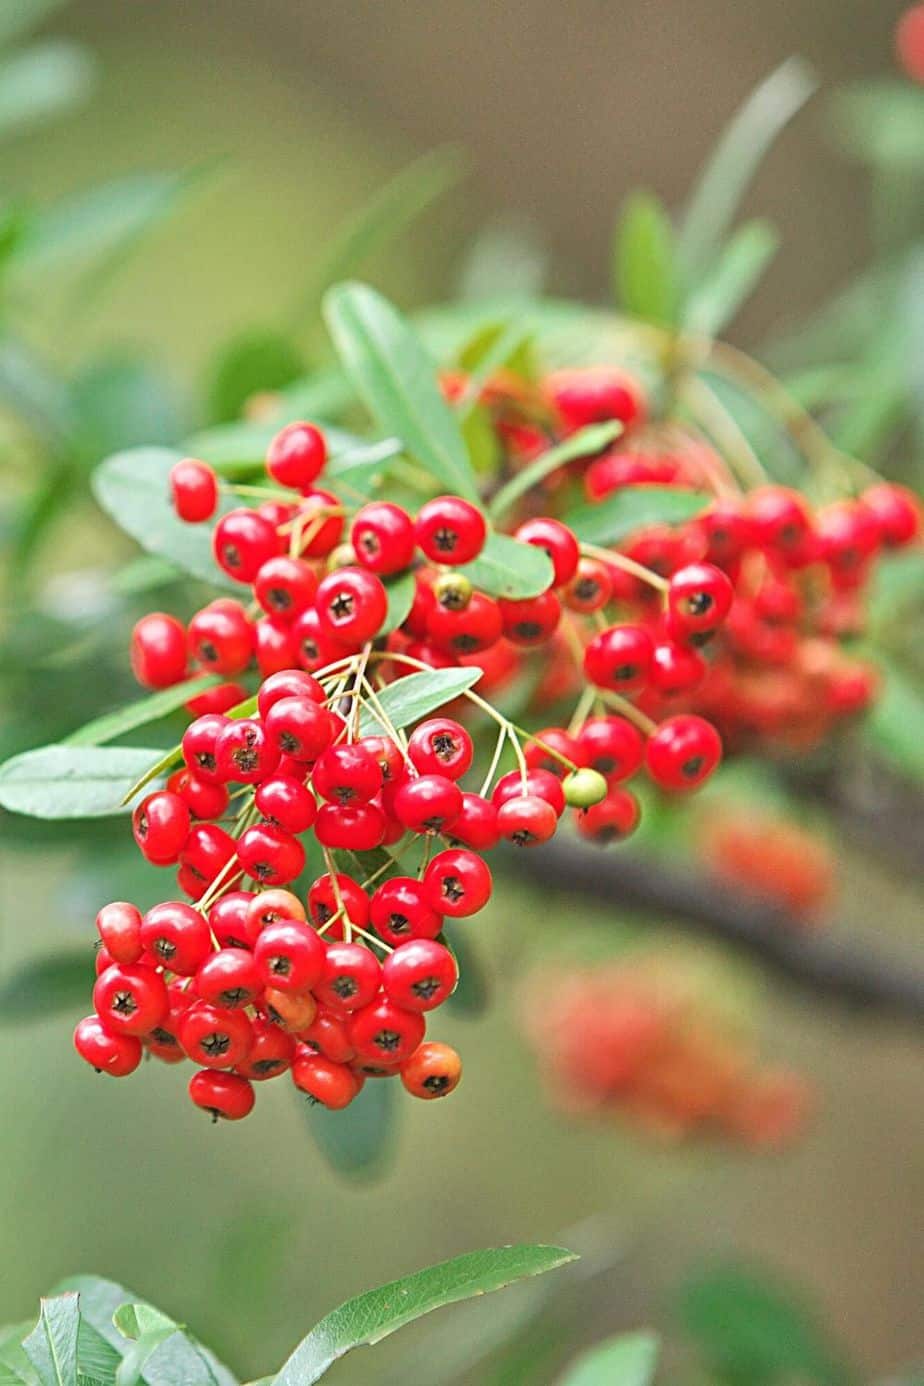 Pyracantha Saphyr Rouge offers a reddish-green coloration in your north-facing side of the house